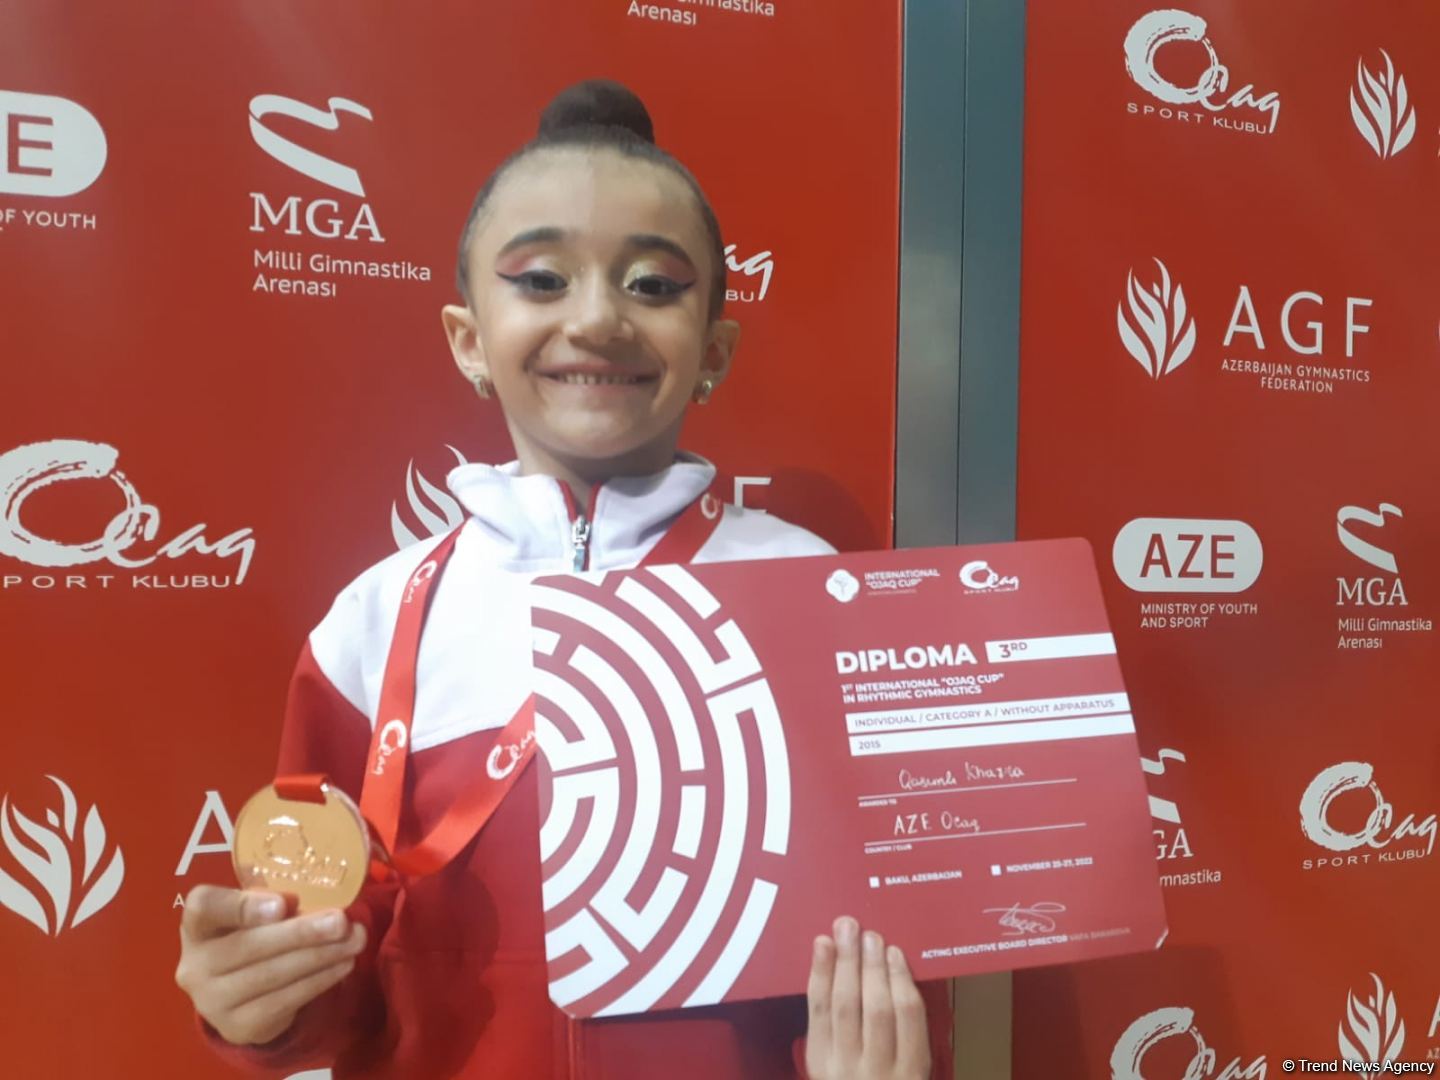 Happy to be among medalists of 1st International "Ojag Cup" - young athlete